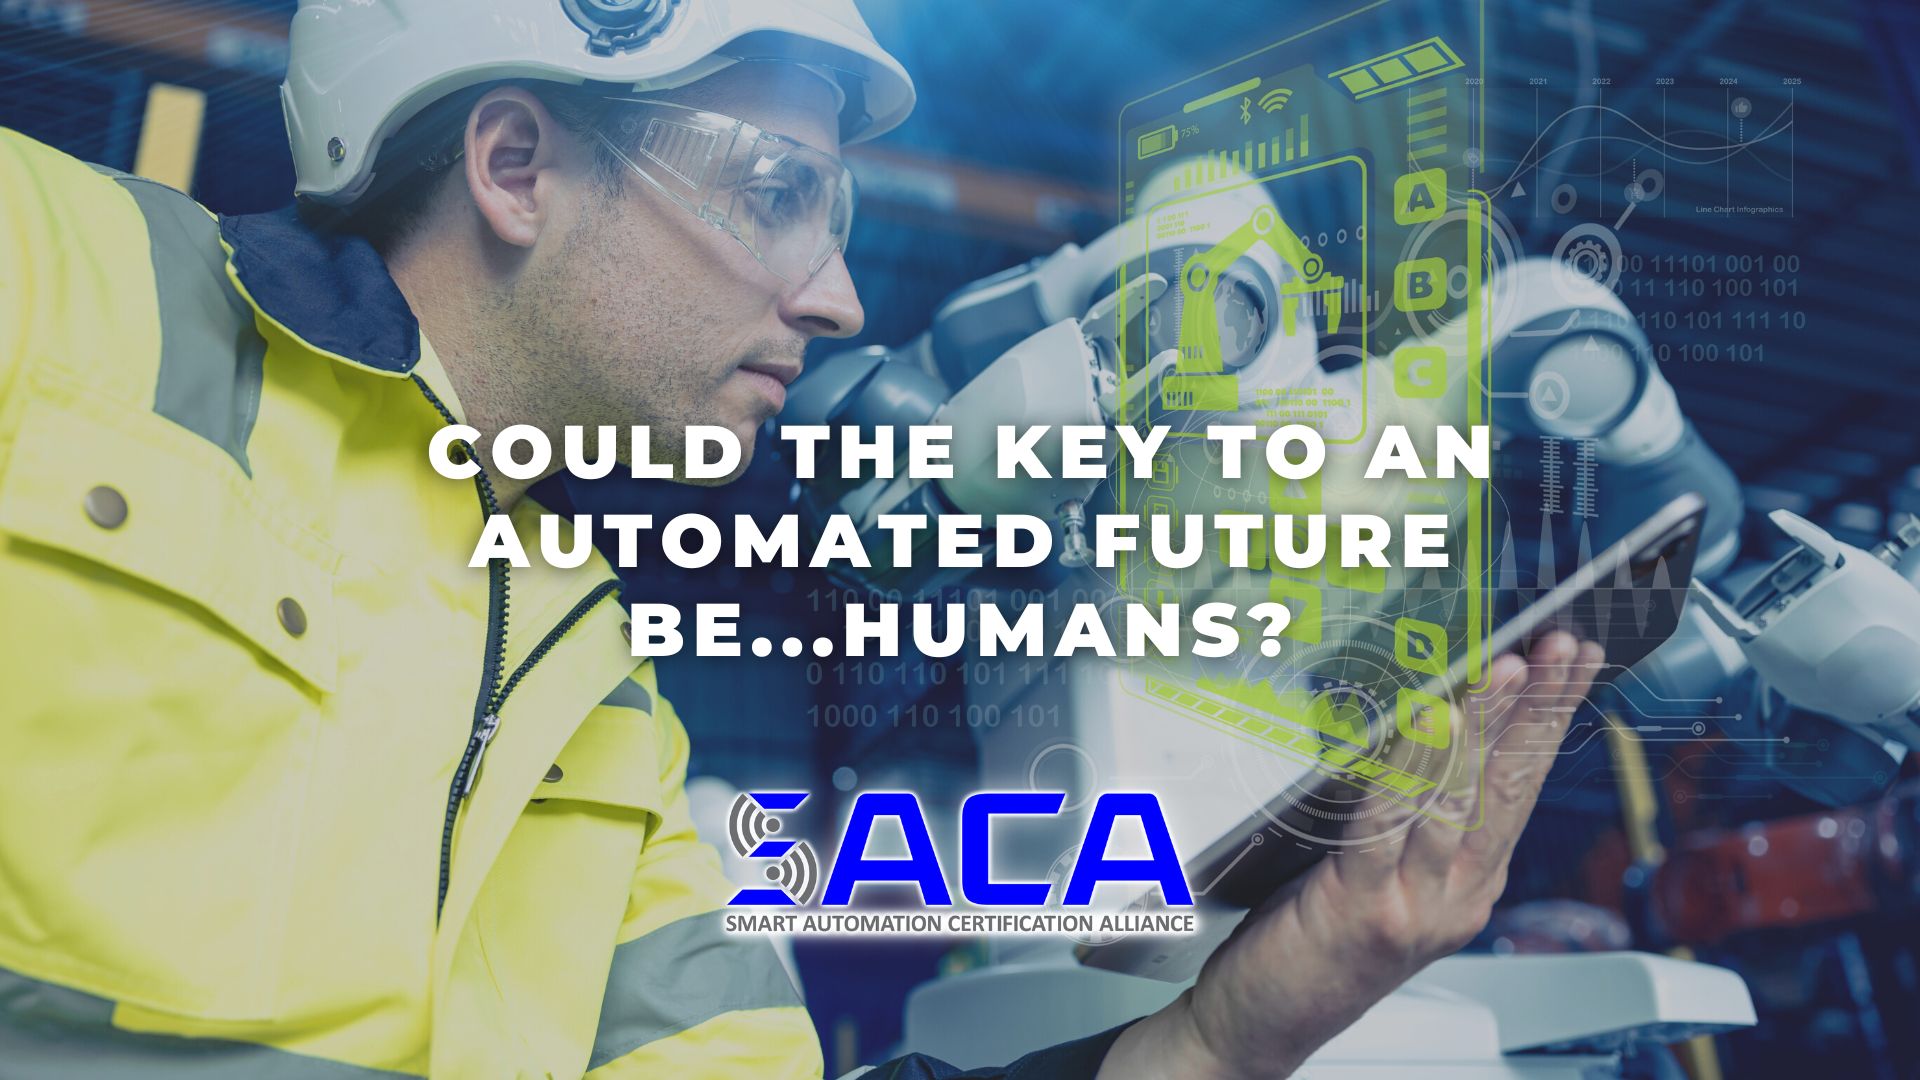 SACA - Connected Workers are the Key to an Automated Future